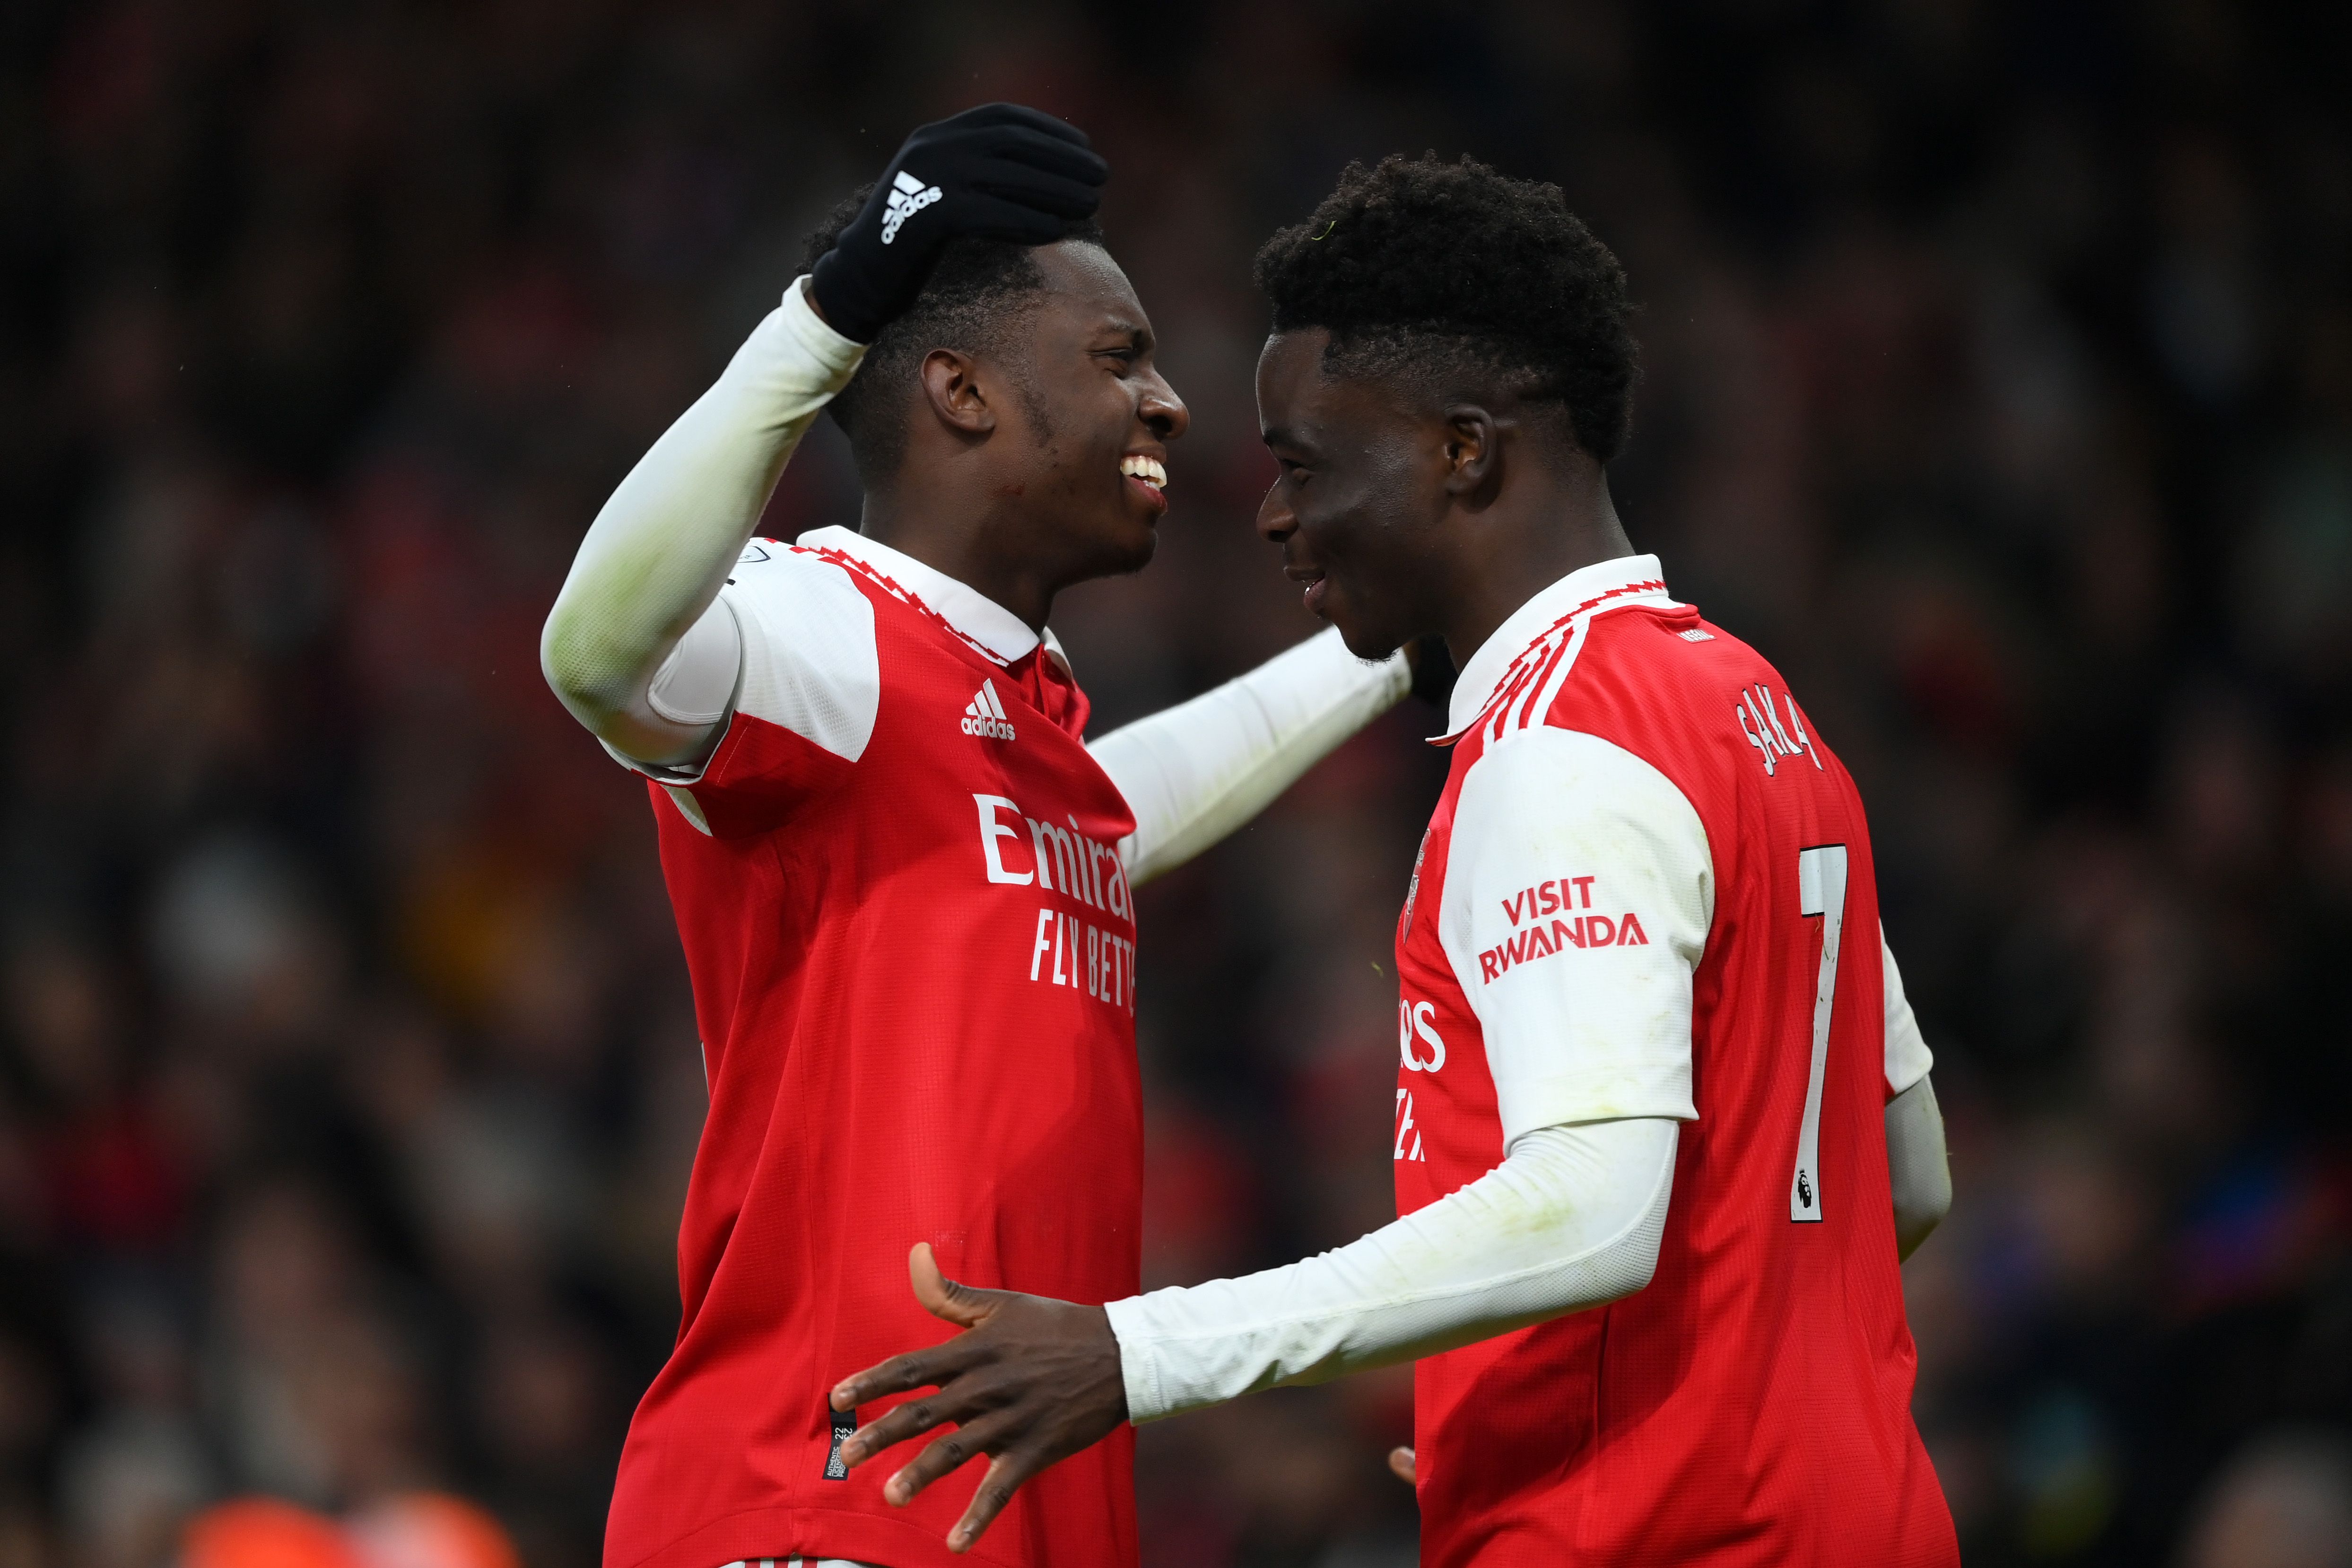 LONDON, ENGLAND - JANUARY 22: Eddie Nketiah celebrates with Bukayo Saka of Arsenal after scoring the team's third goal during the Premier League match between Arsenal FC and Manchester United at Emirates Stadium on January 22, 2023 in London, England. (Photo by Shaun Botterill/Getty Images)